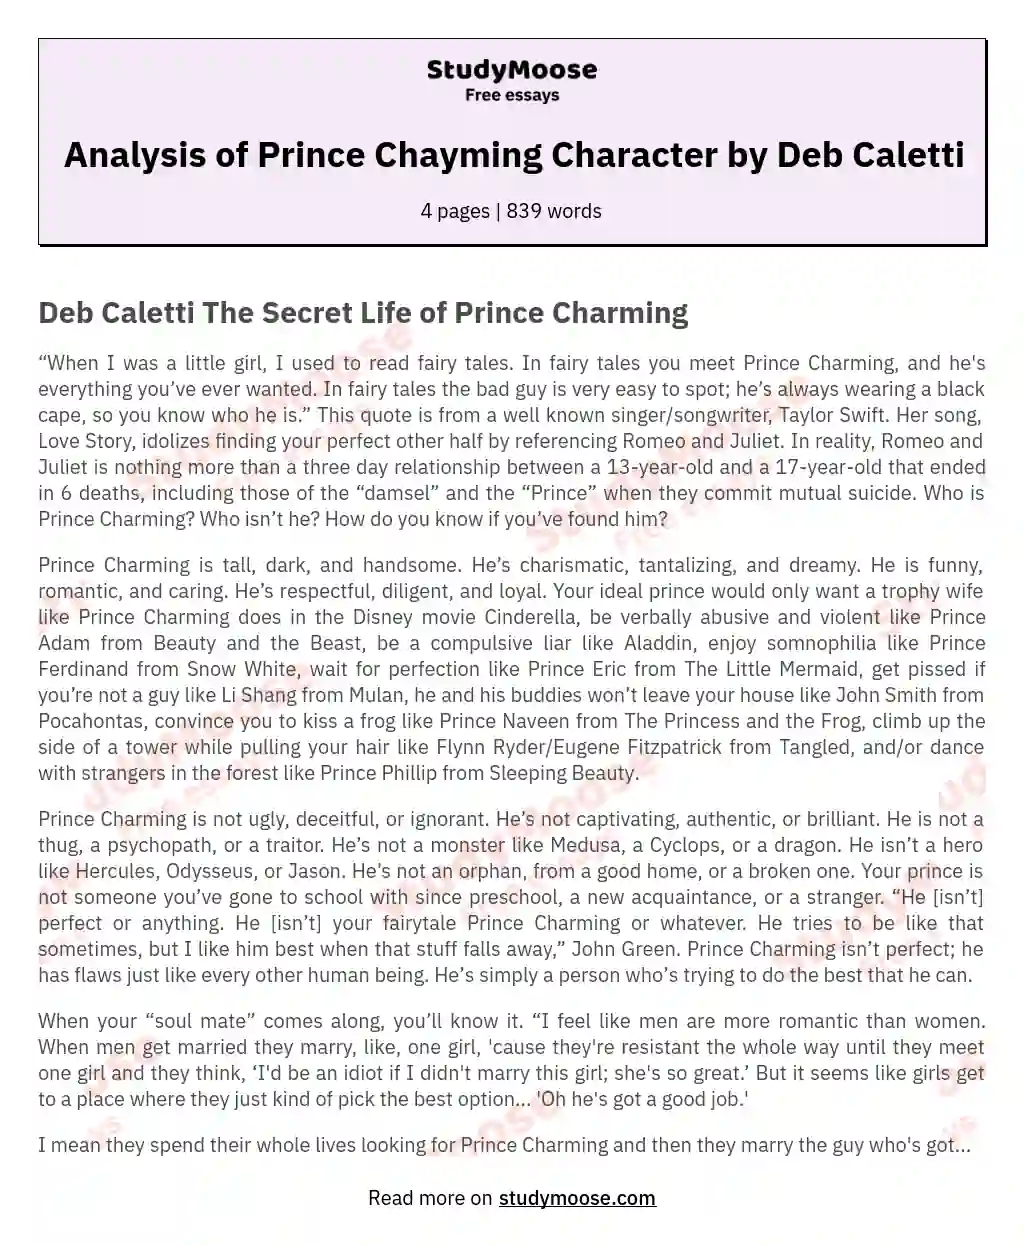 Analysis of Prince Chayming Character by Deb Caletti essay